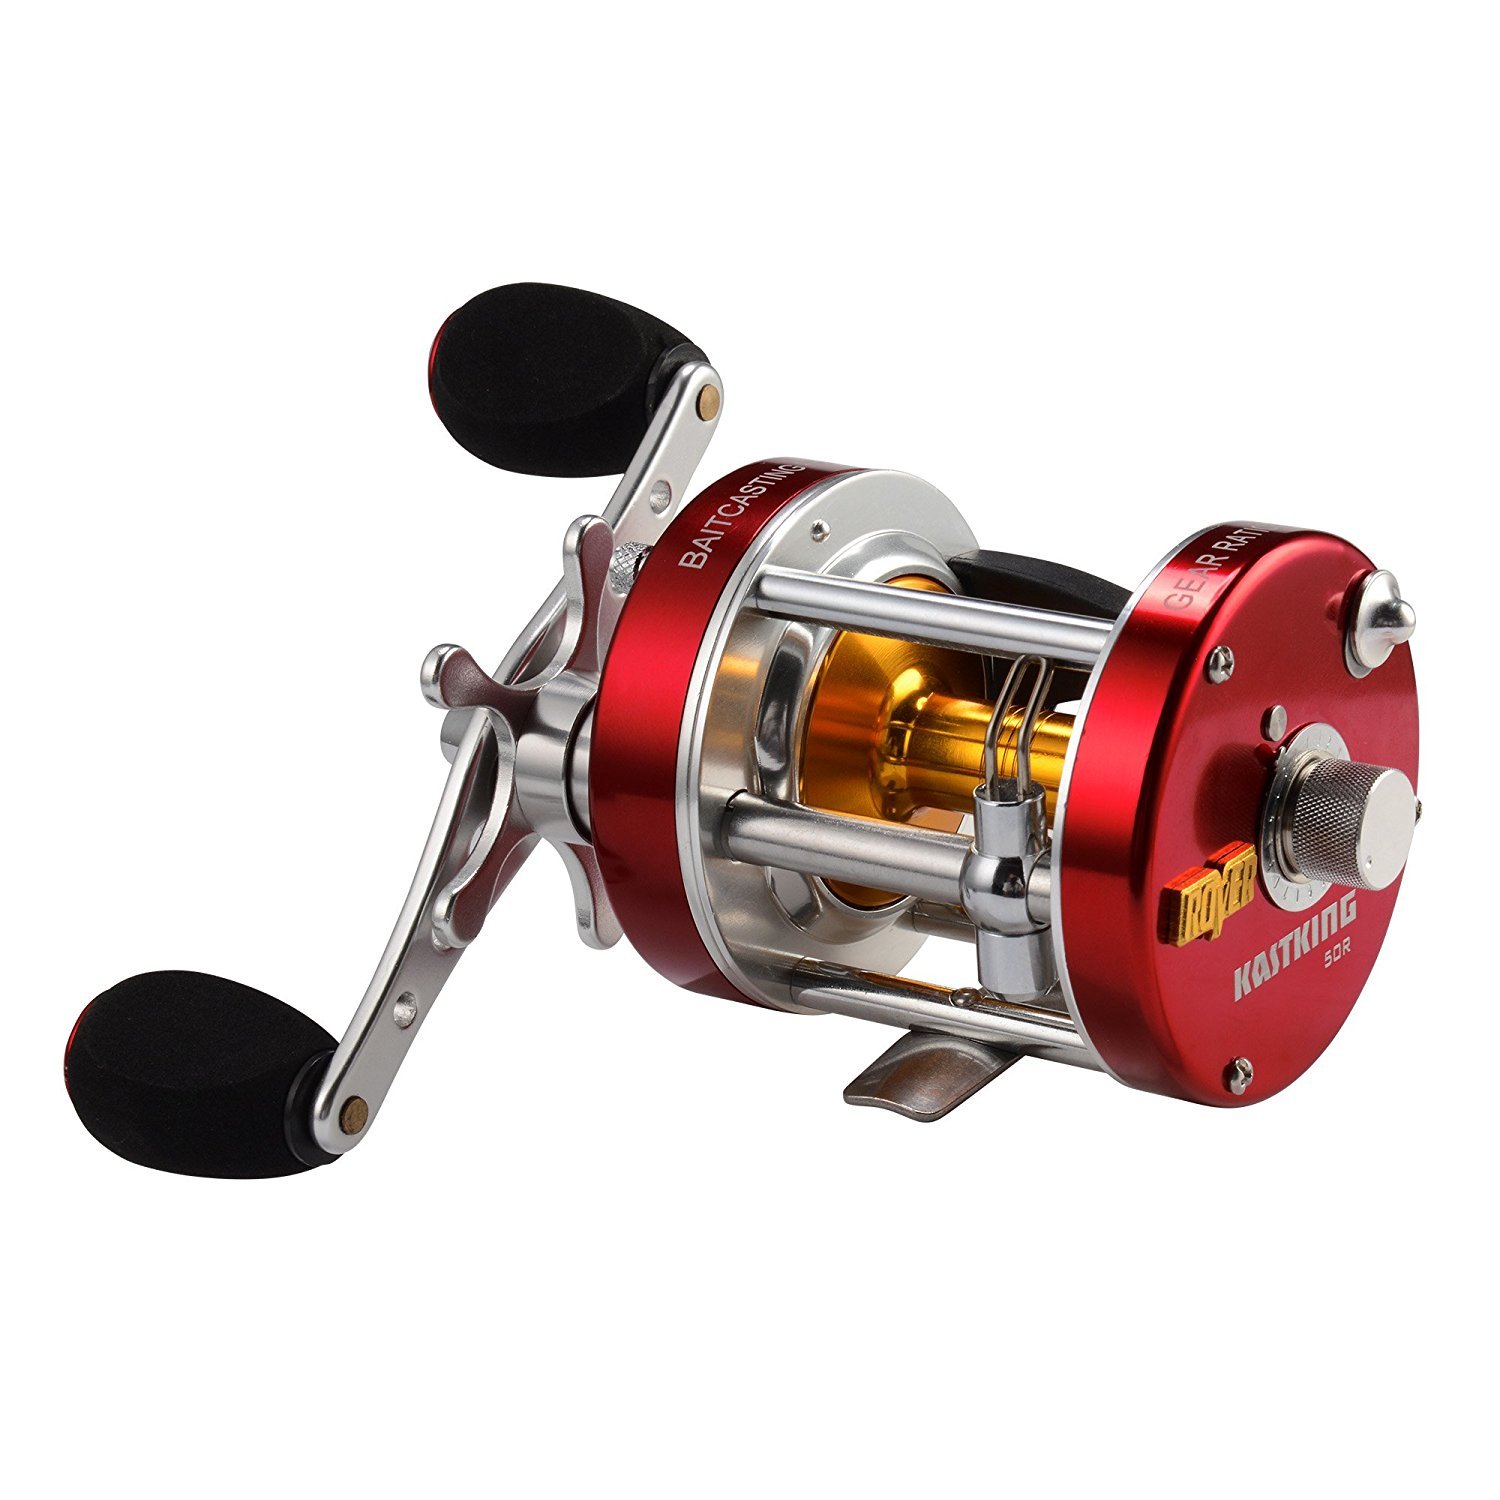 Best Conventional Reel for Bottom Fishing - Top 10 Conventional Reels